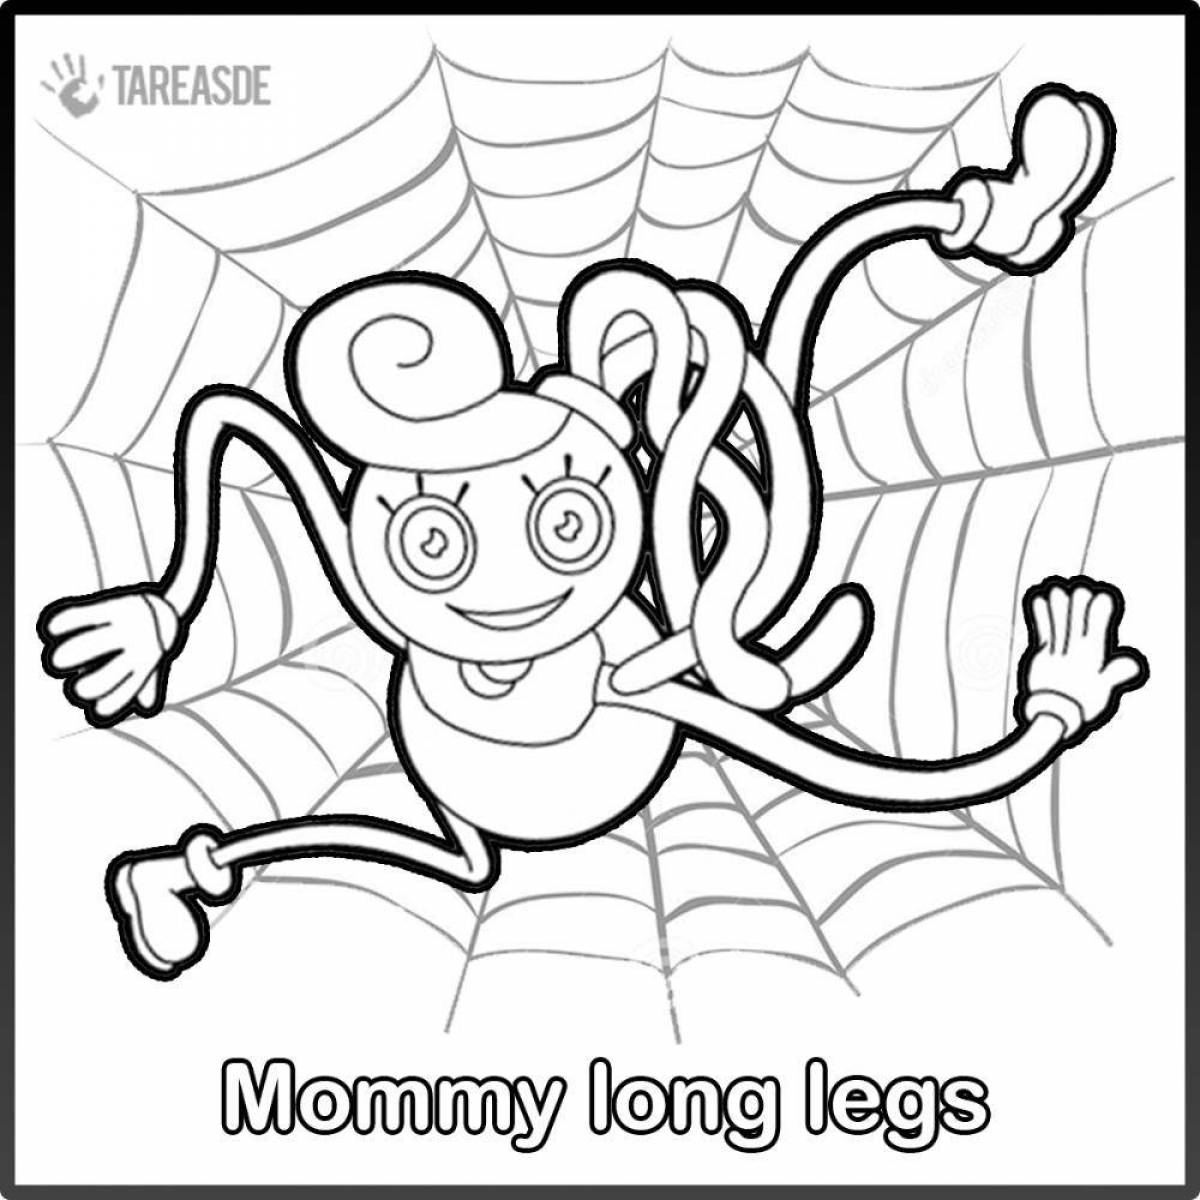 Coloring page amazing leggy mami